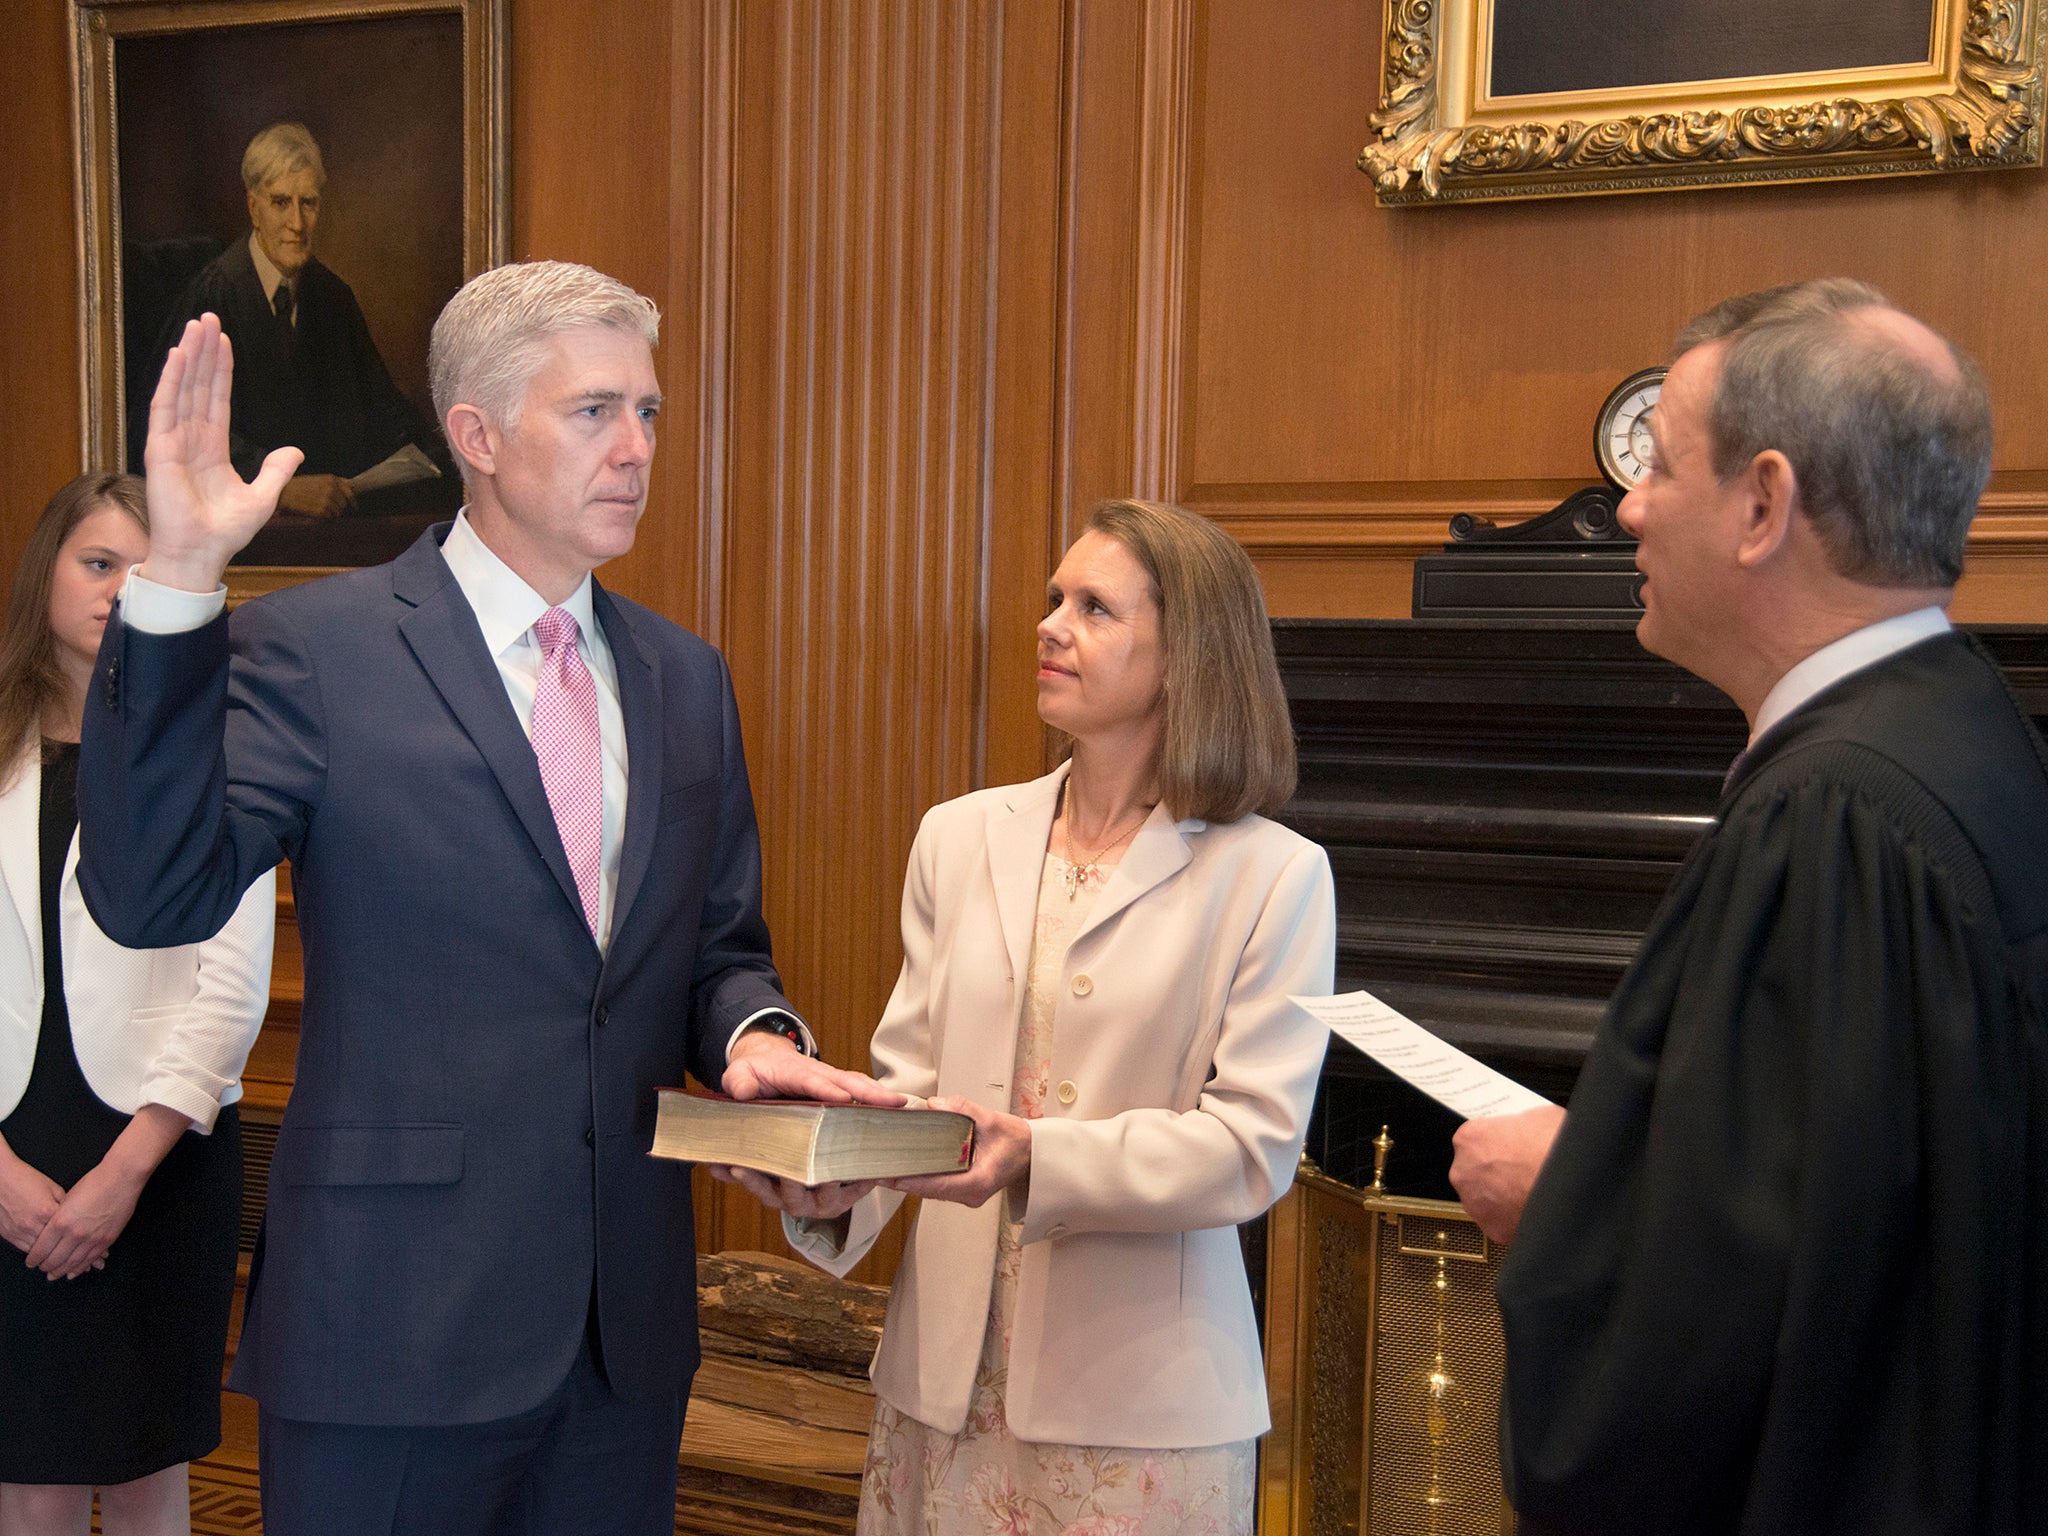 Neil Gorsuch is sworn in as the next Supreme Court Justice